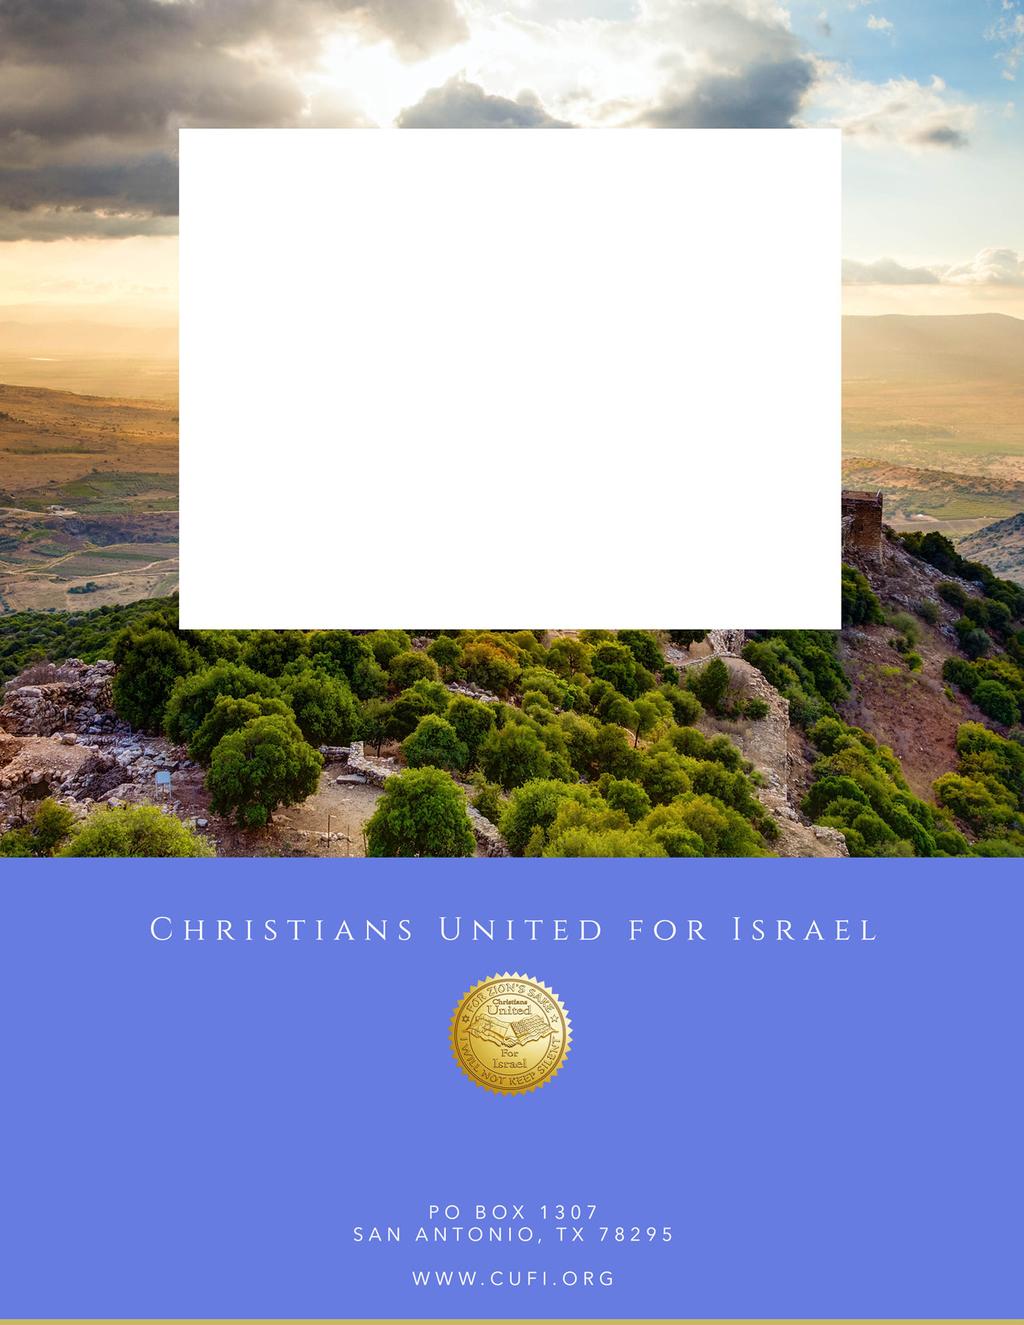 About Christians United for Israel Christians United for Israel (CUFI) is the largest pro- Israel organization in the United States, with more than 3 million